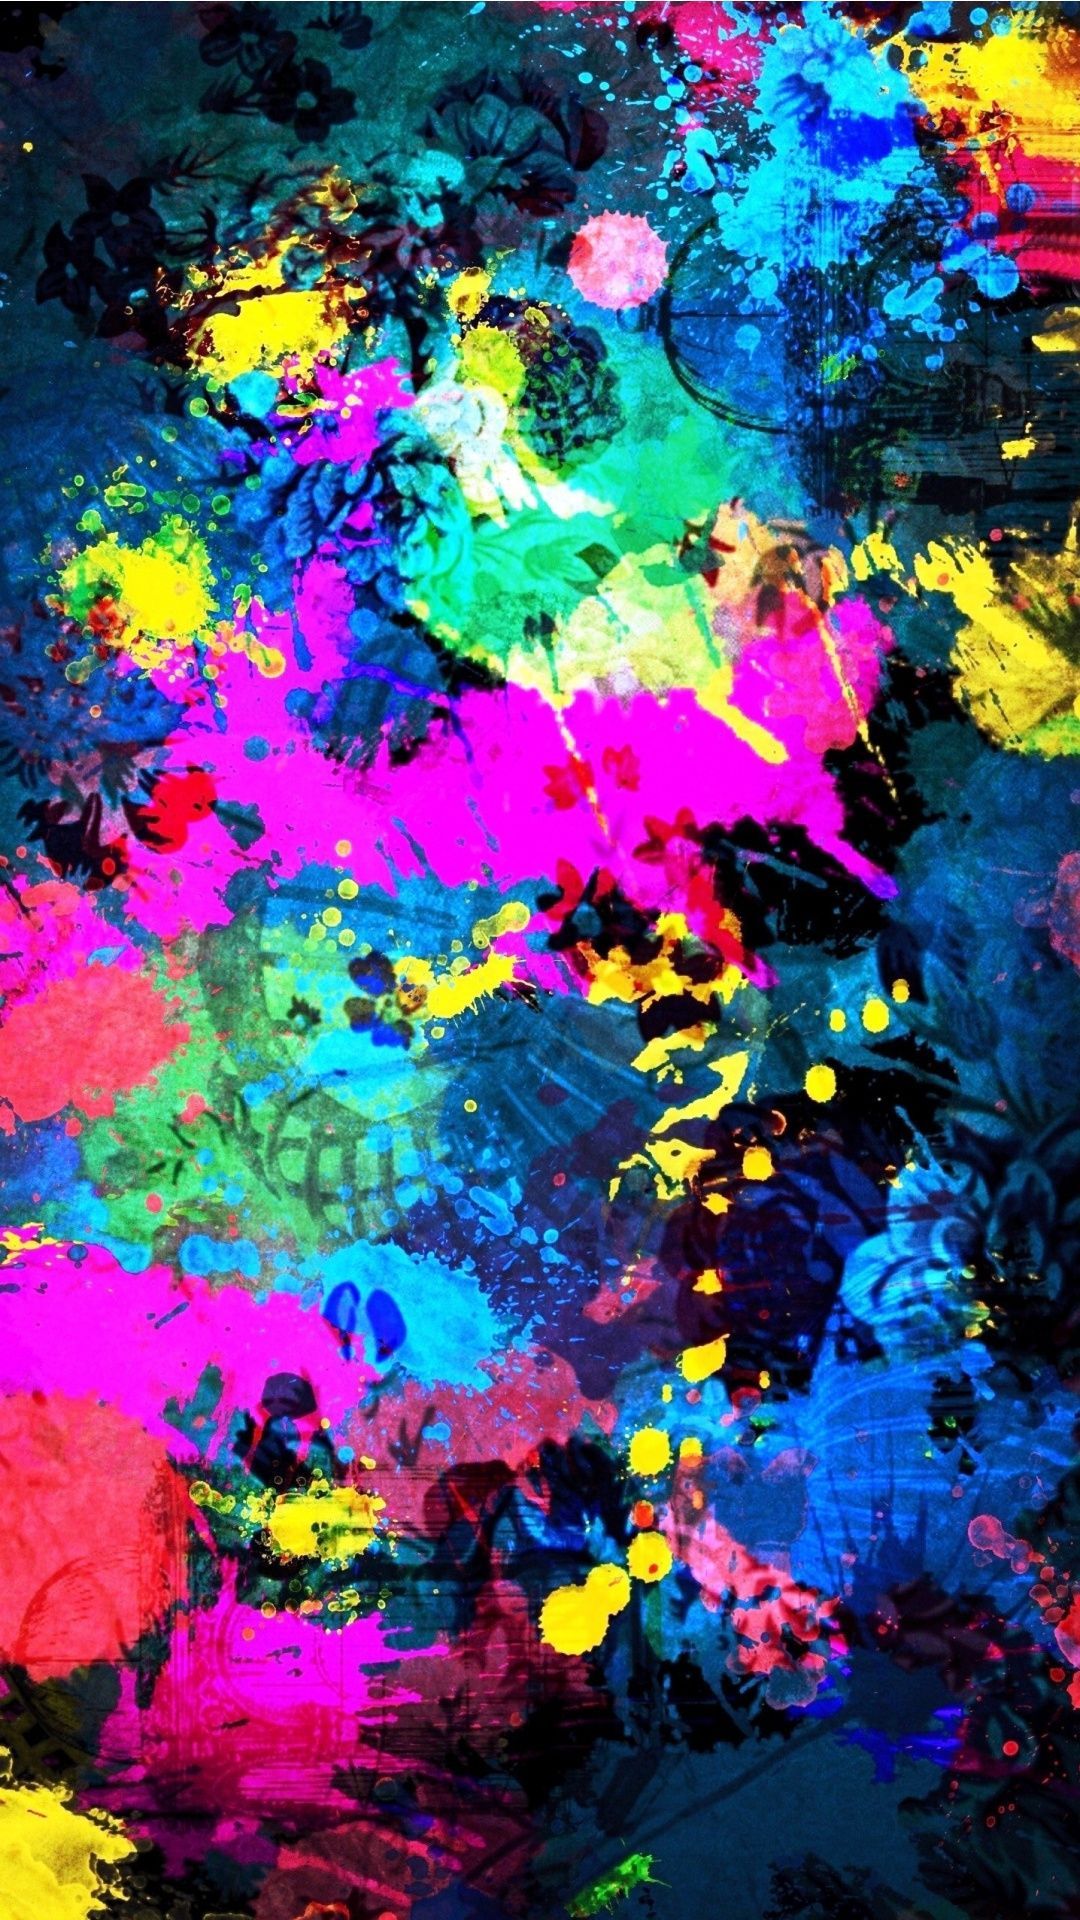 Colorful Phone Wallpaper Free Colorful Phone Background